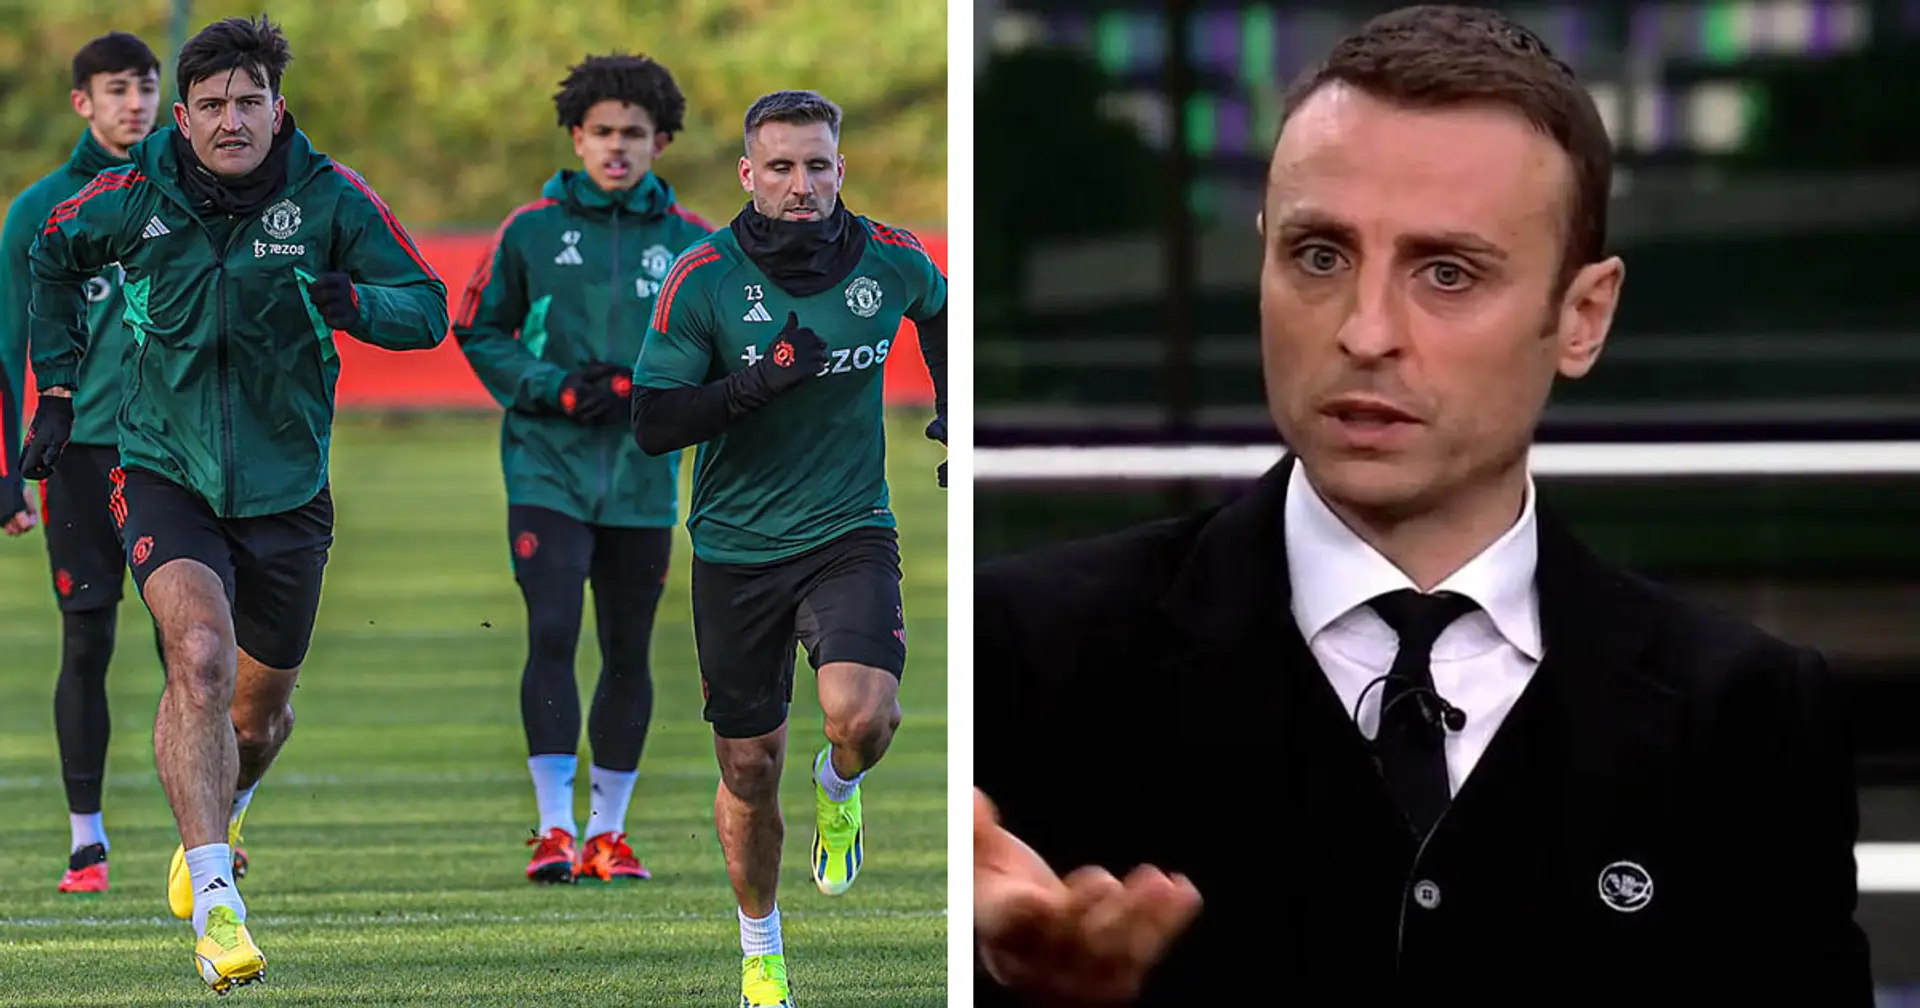 'They could make the dressing room cold': Berbatov sends warning to Man United players on Newport clash